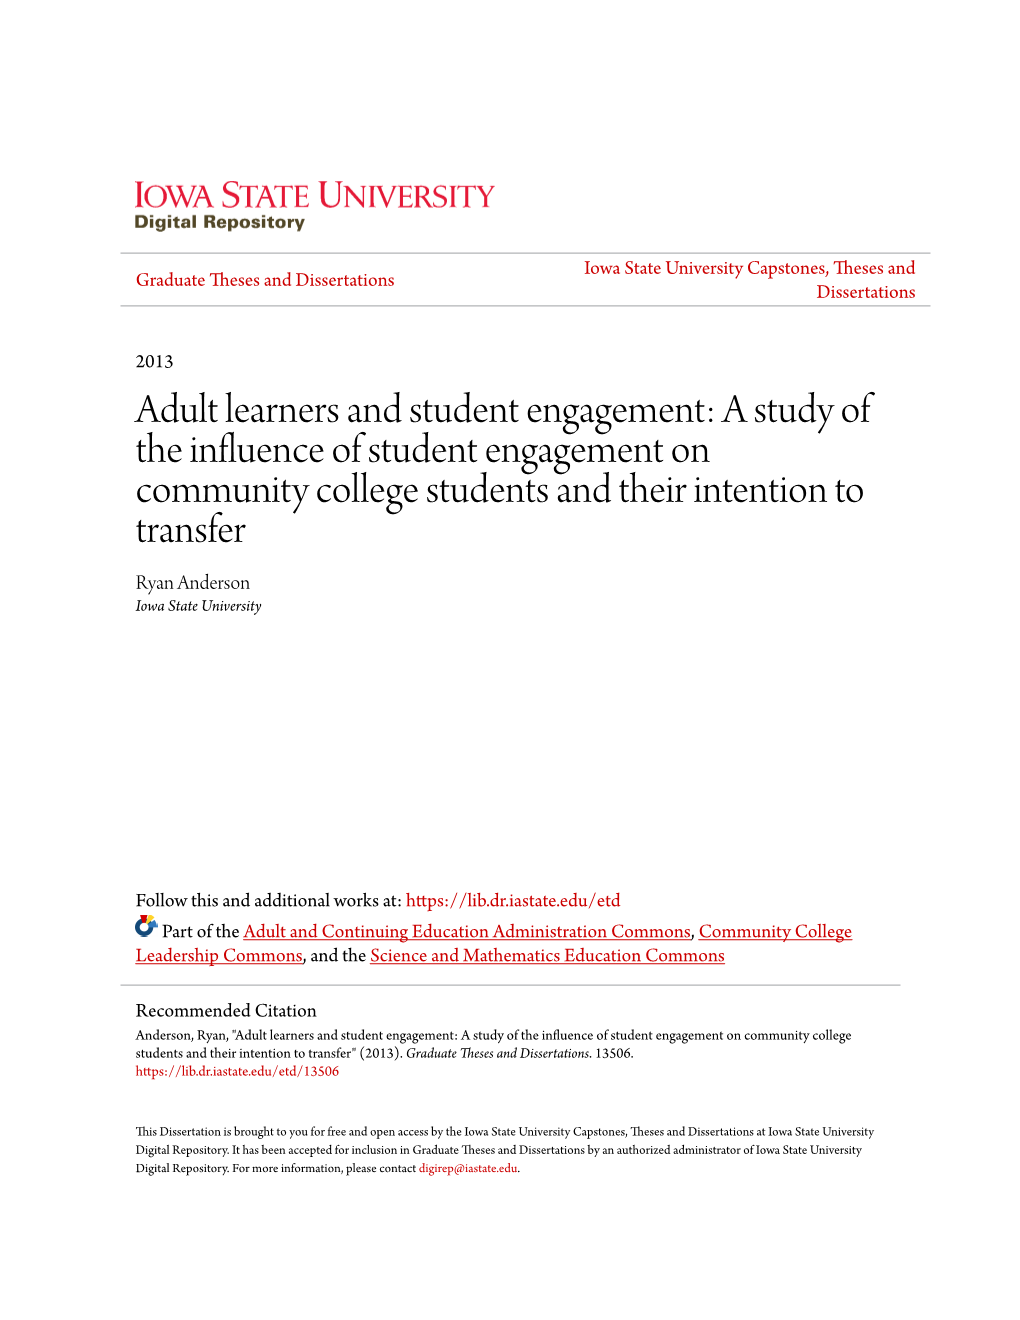 Adult Learners and Student Engagement